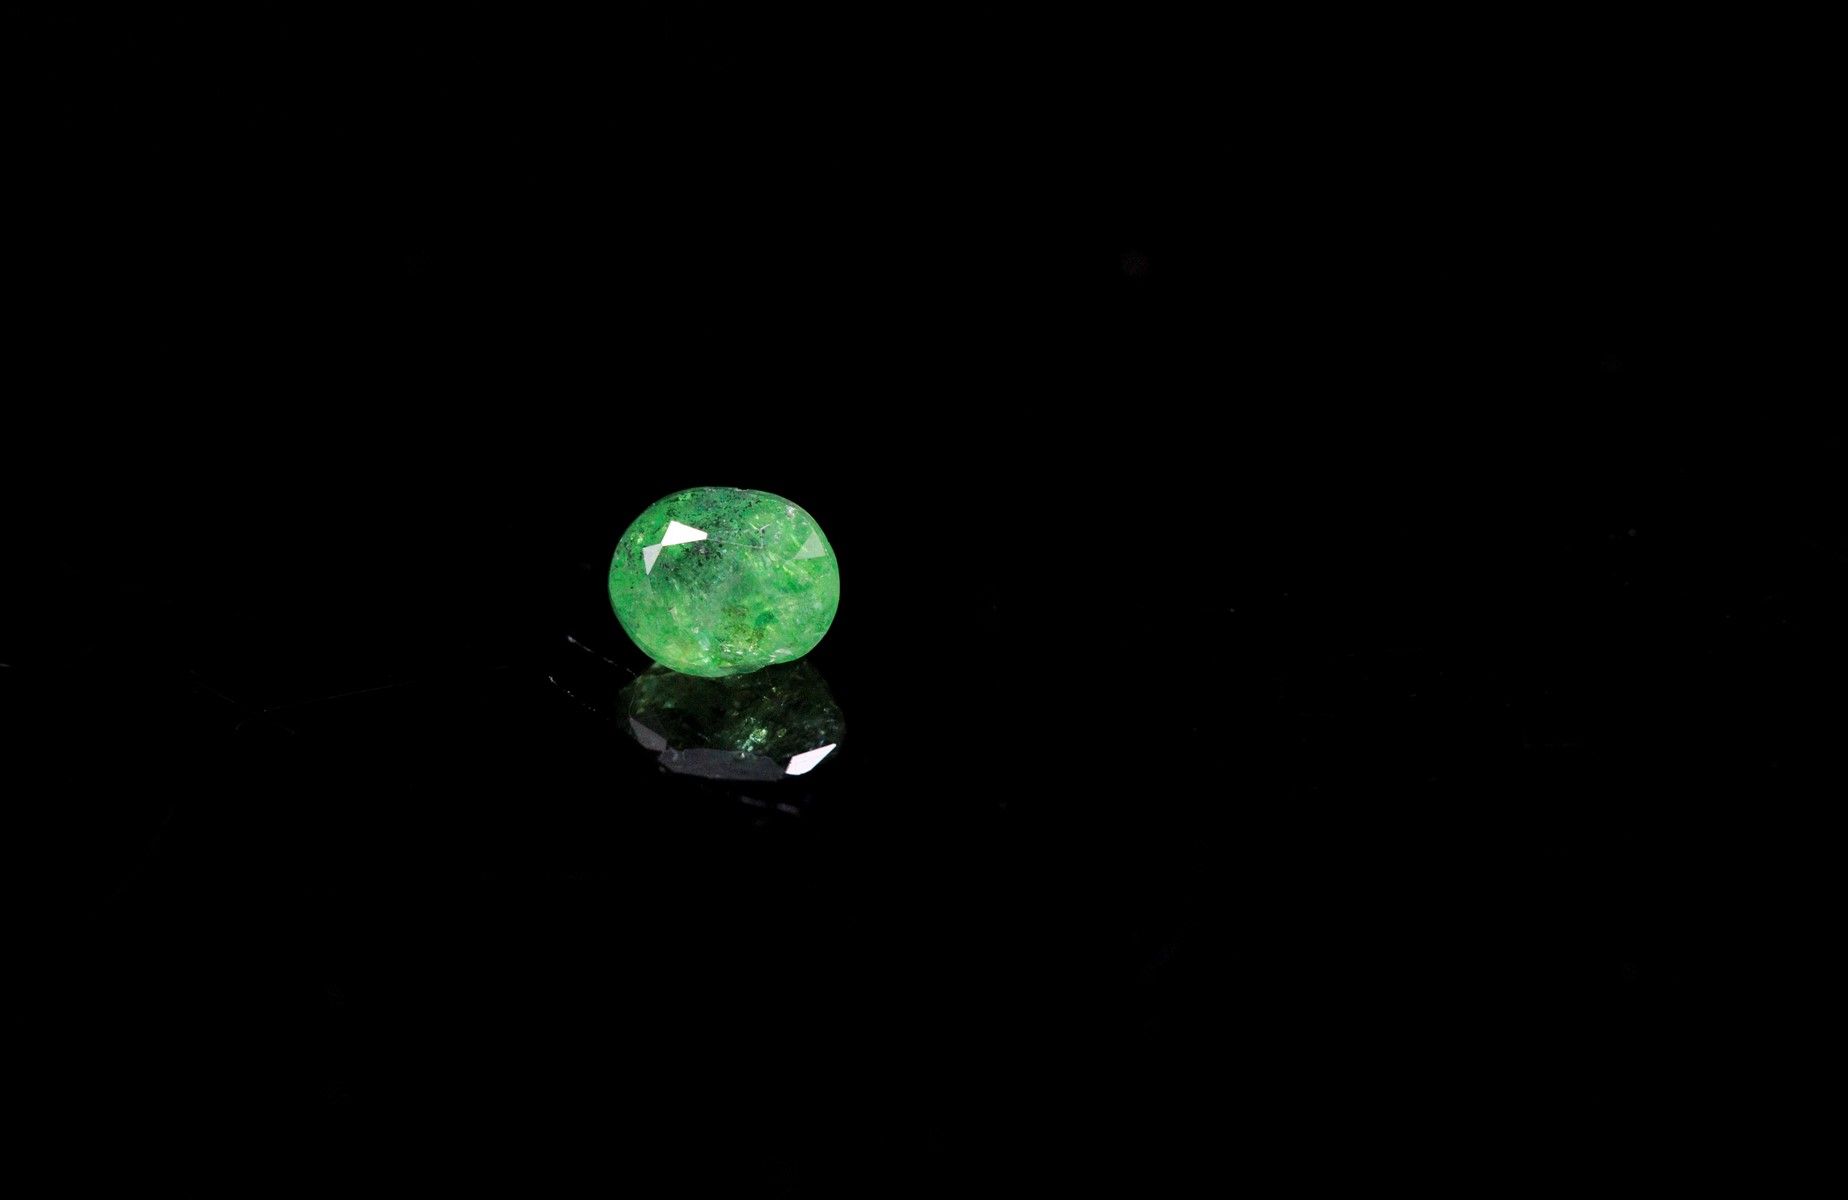 Null Oval tsavorite garnet on paper.
Weight : 0.73 ct

Dimensions: 5.5mm x 4mm